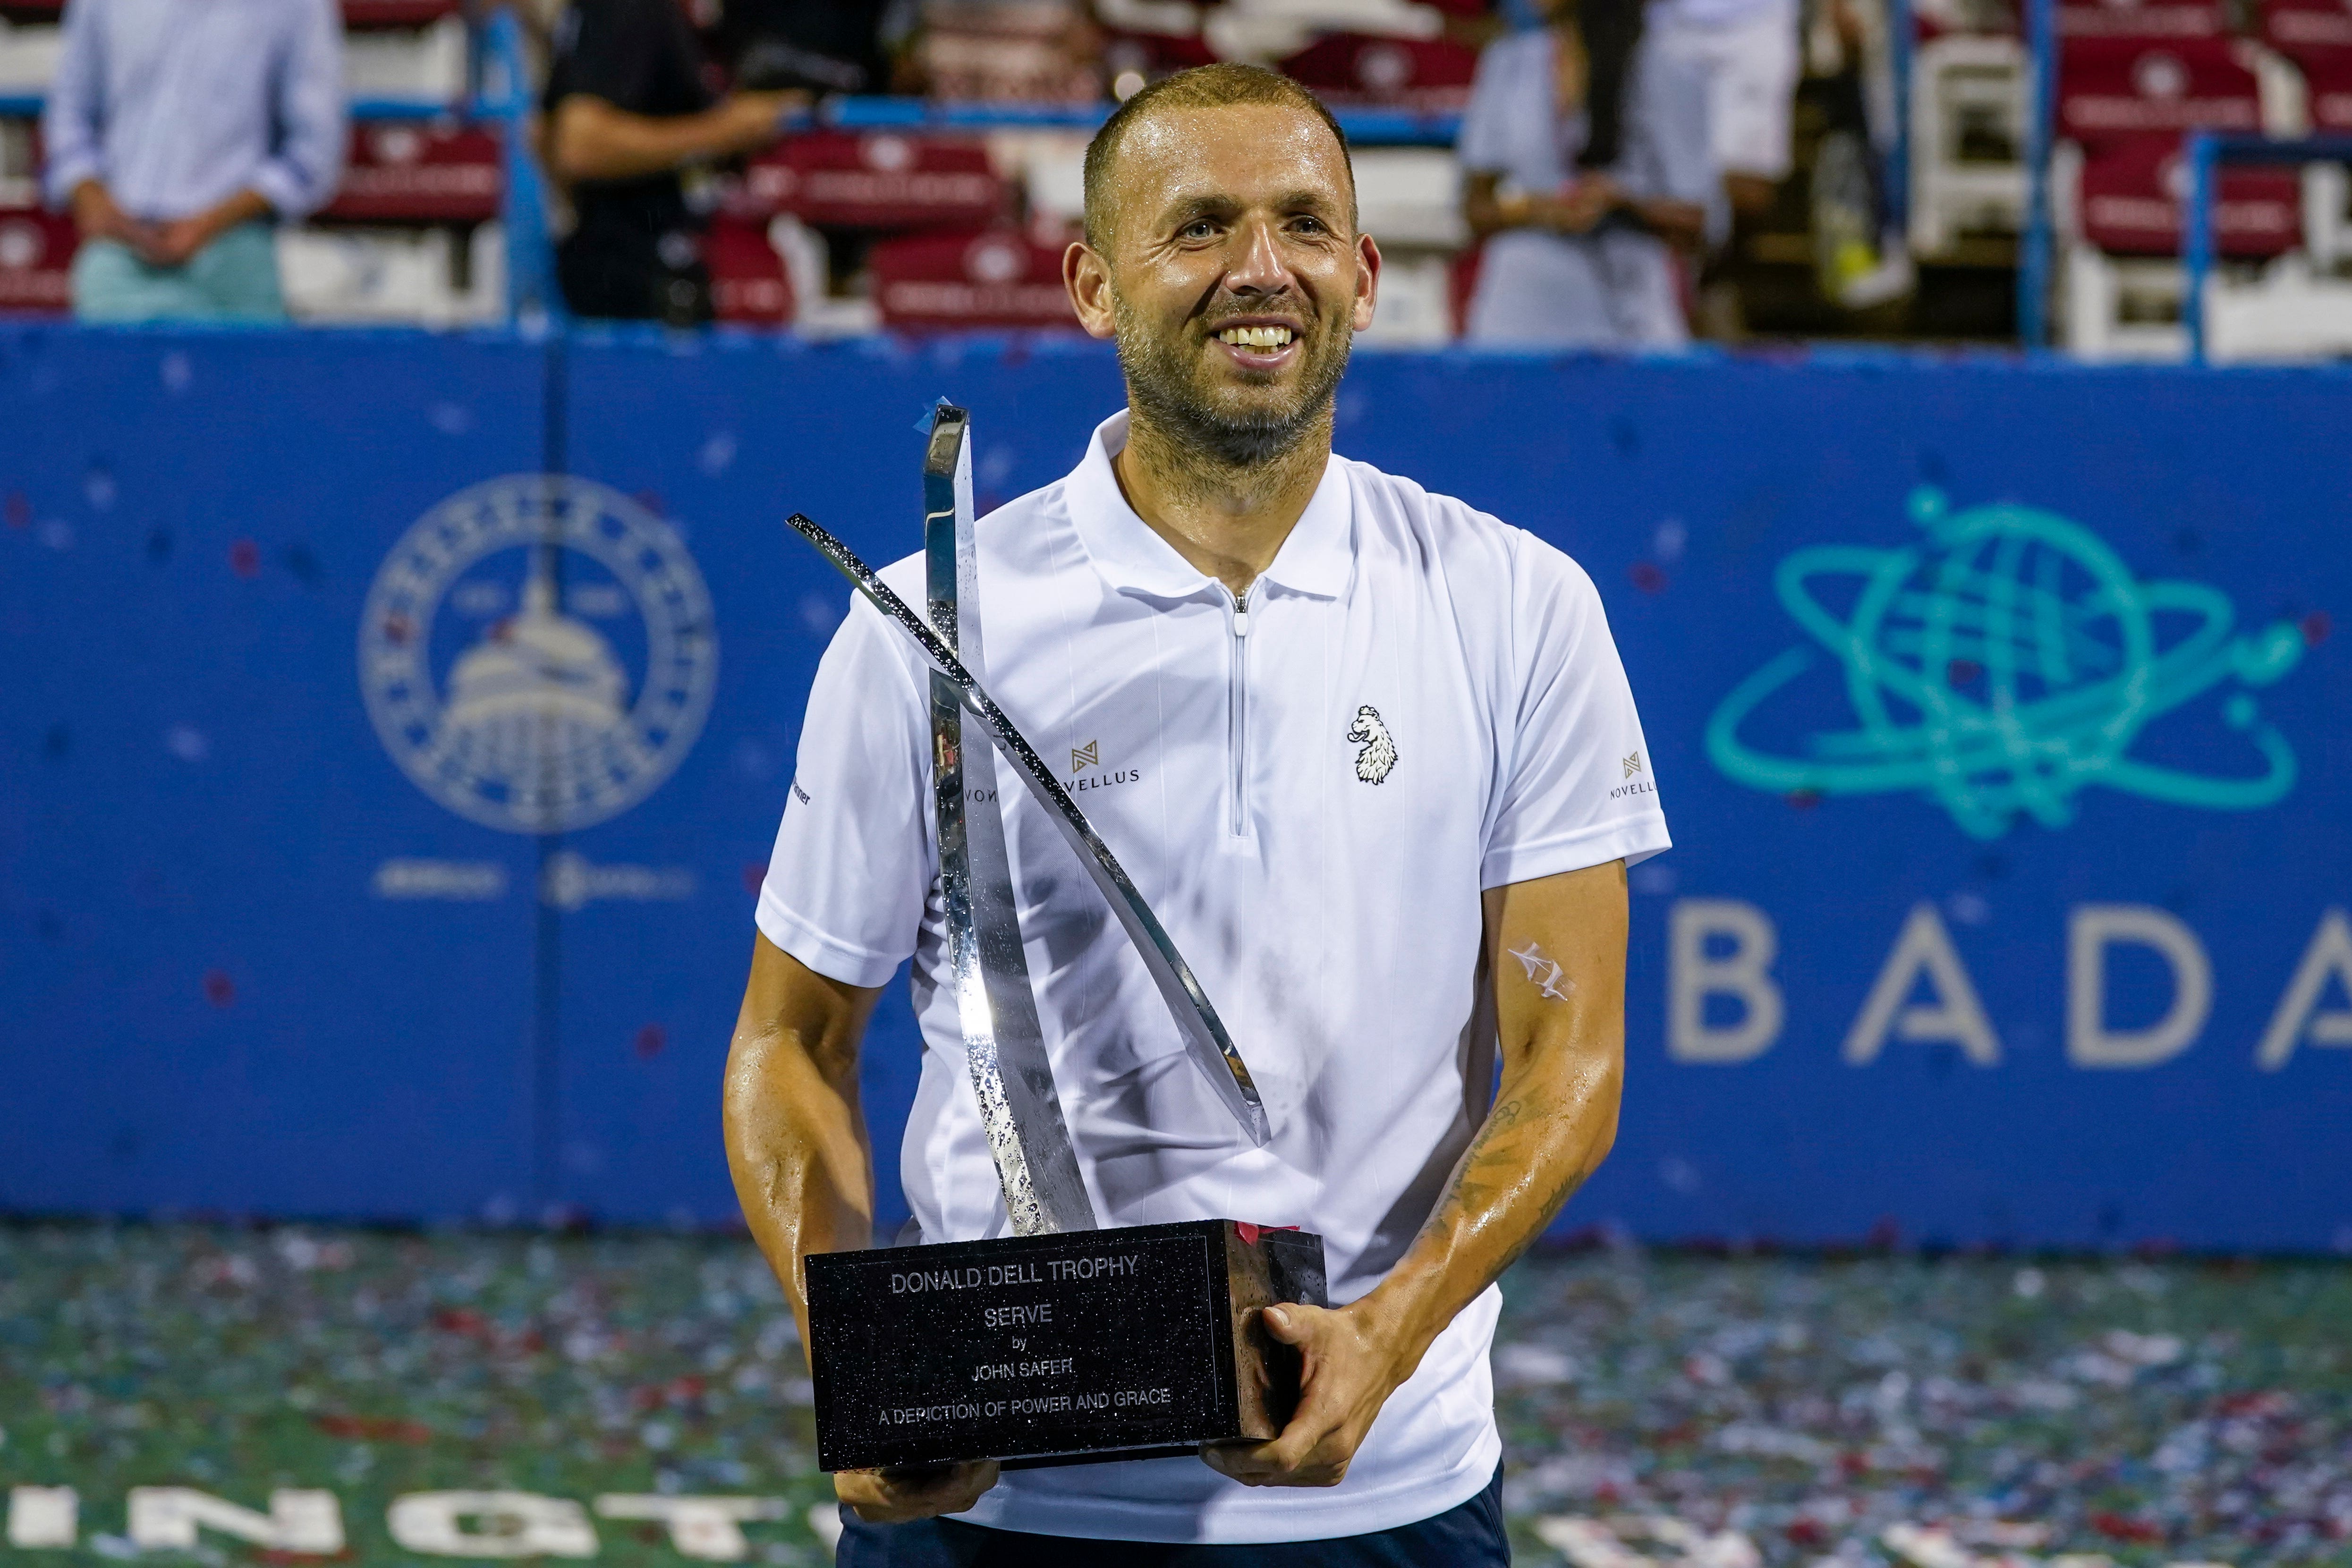 Dan Evans puts poor form behind him to claim amazing Citi Open title win The Independent